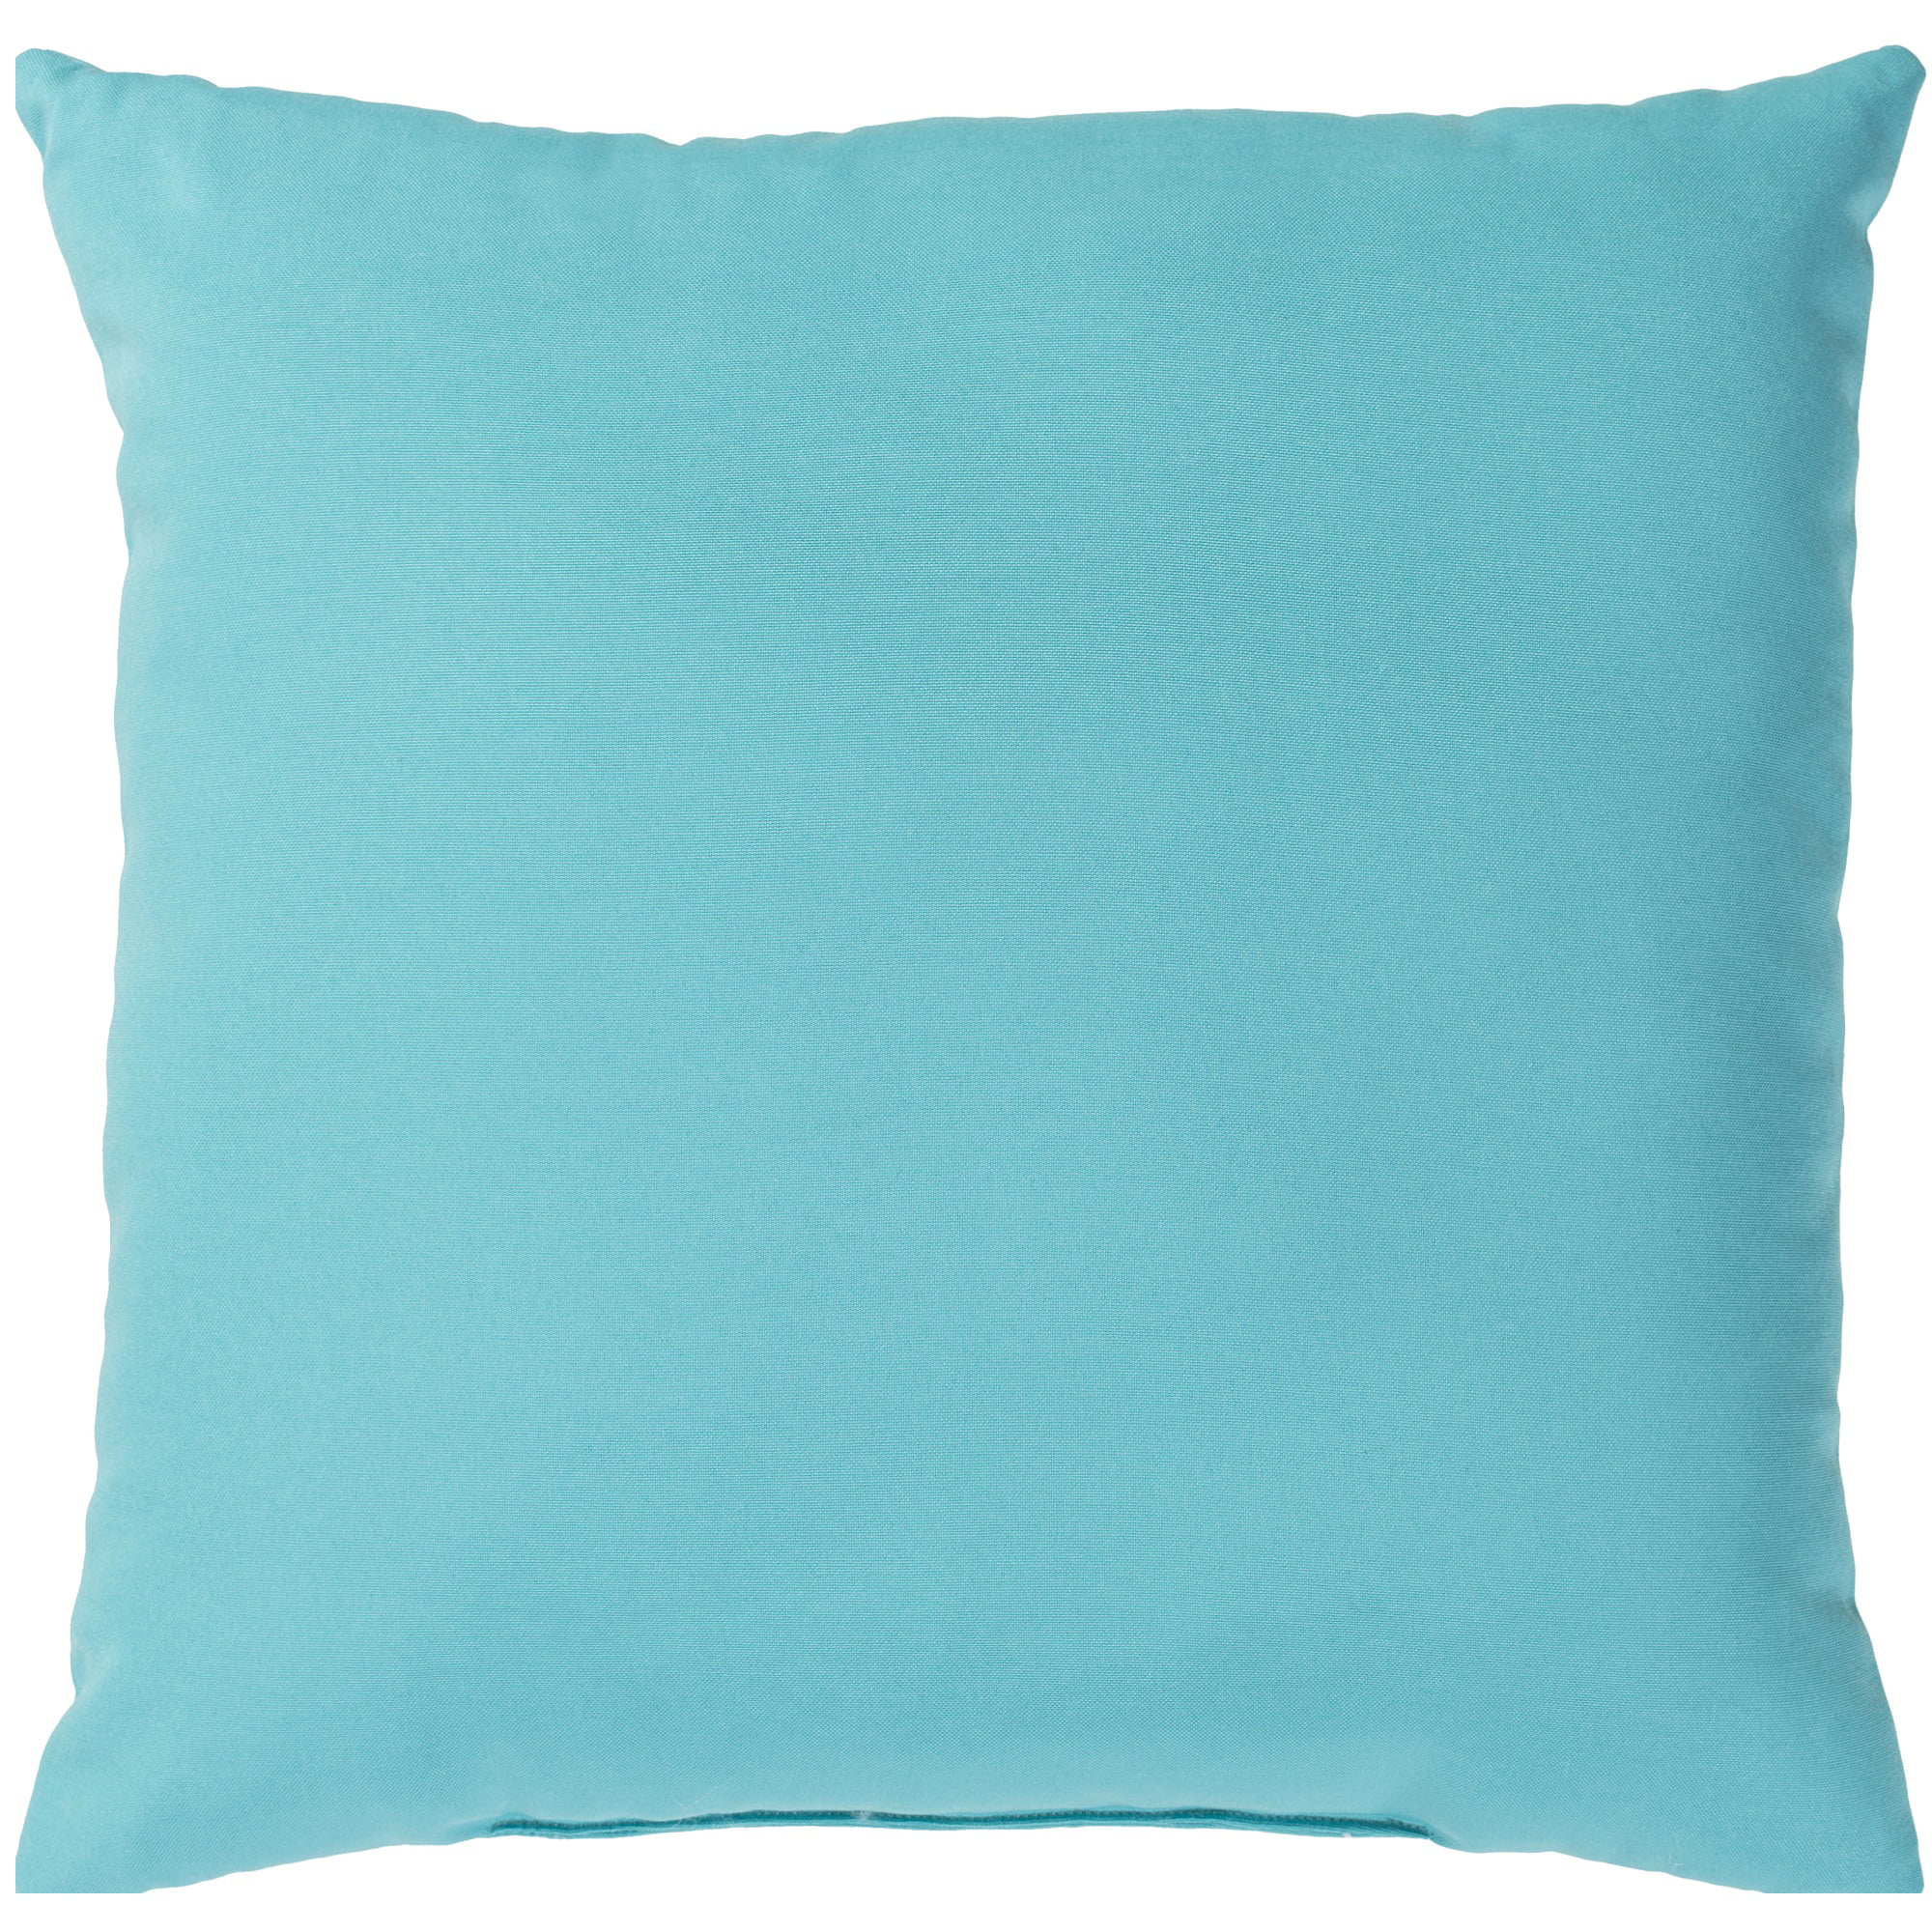 Chenille Teal Blue Plain Piped Finish Cushion Cover Handmade To Order